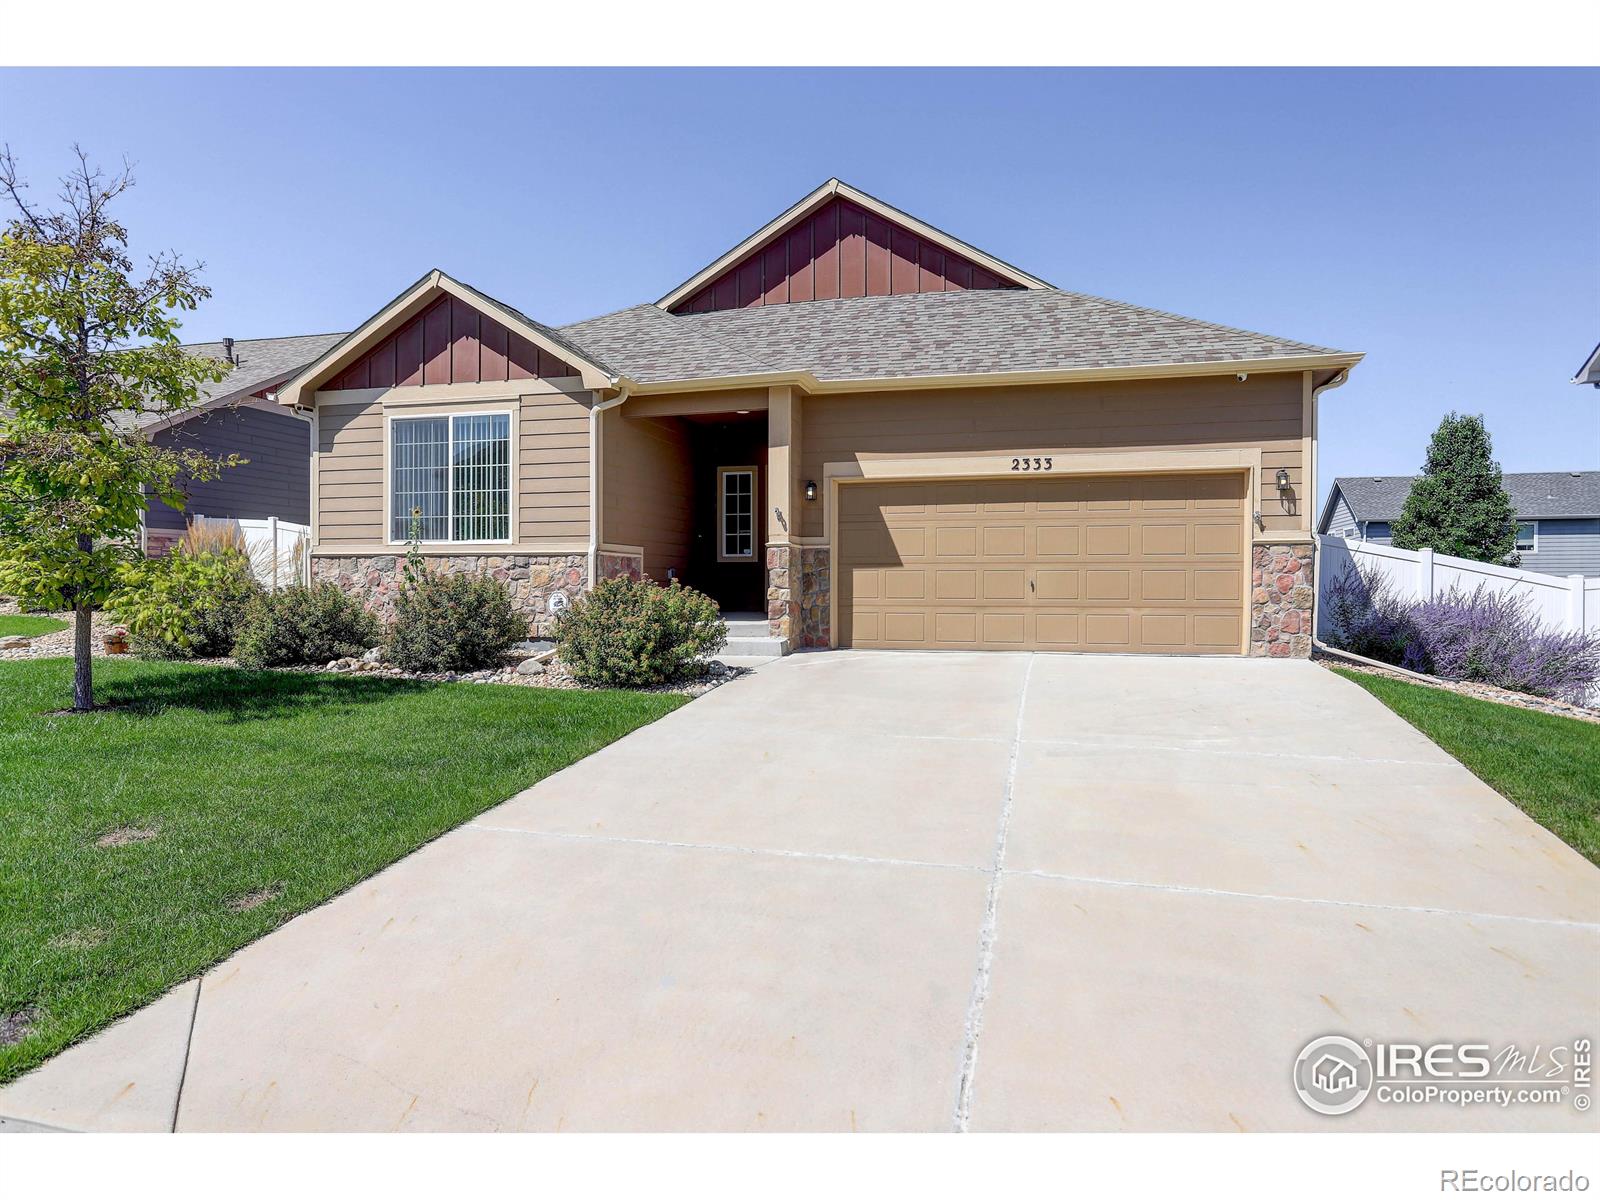 2333  76th ave ct, Greeley sold home. Closed on 2024-01-30 for $459,900.